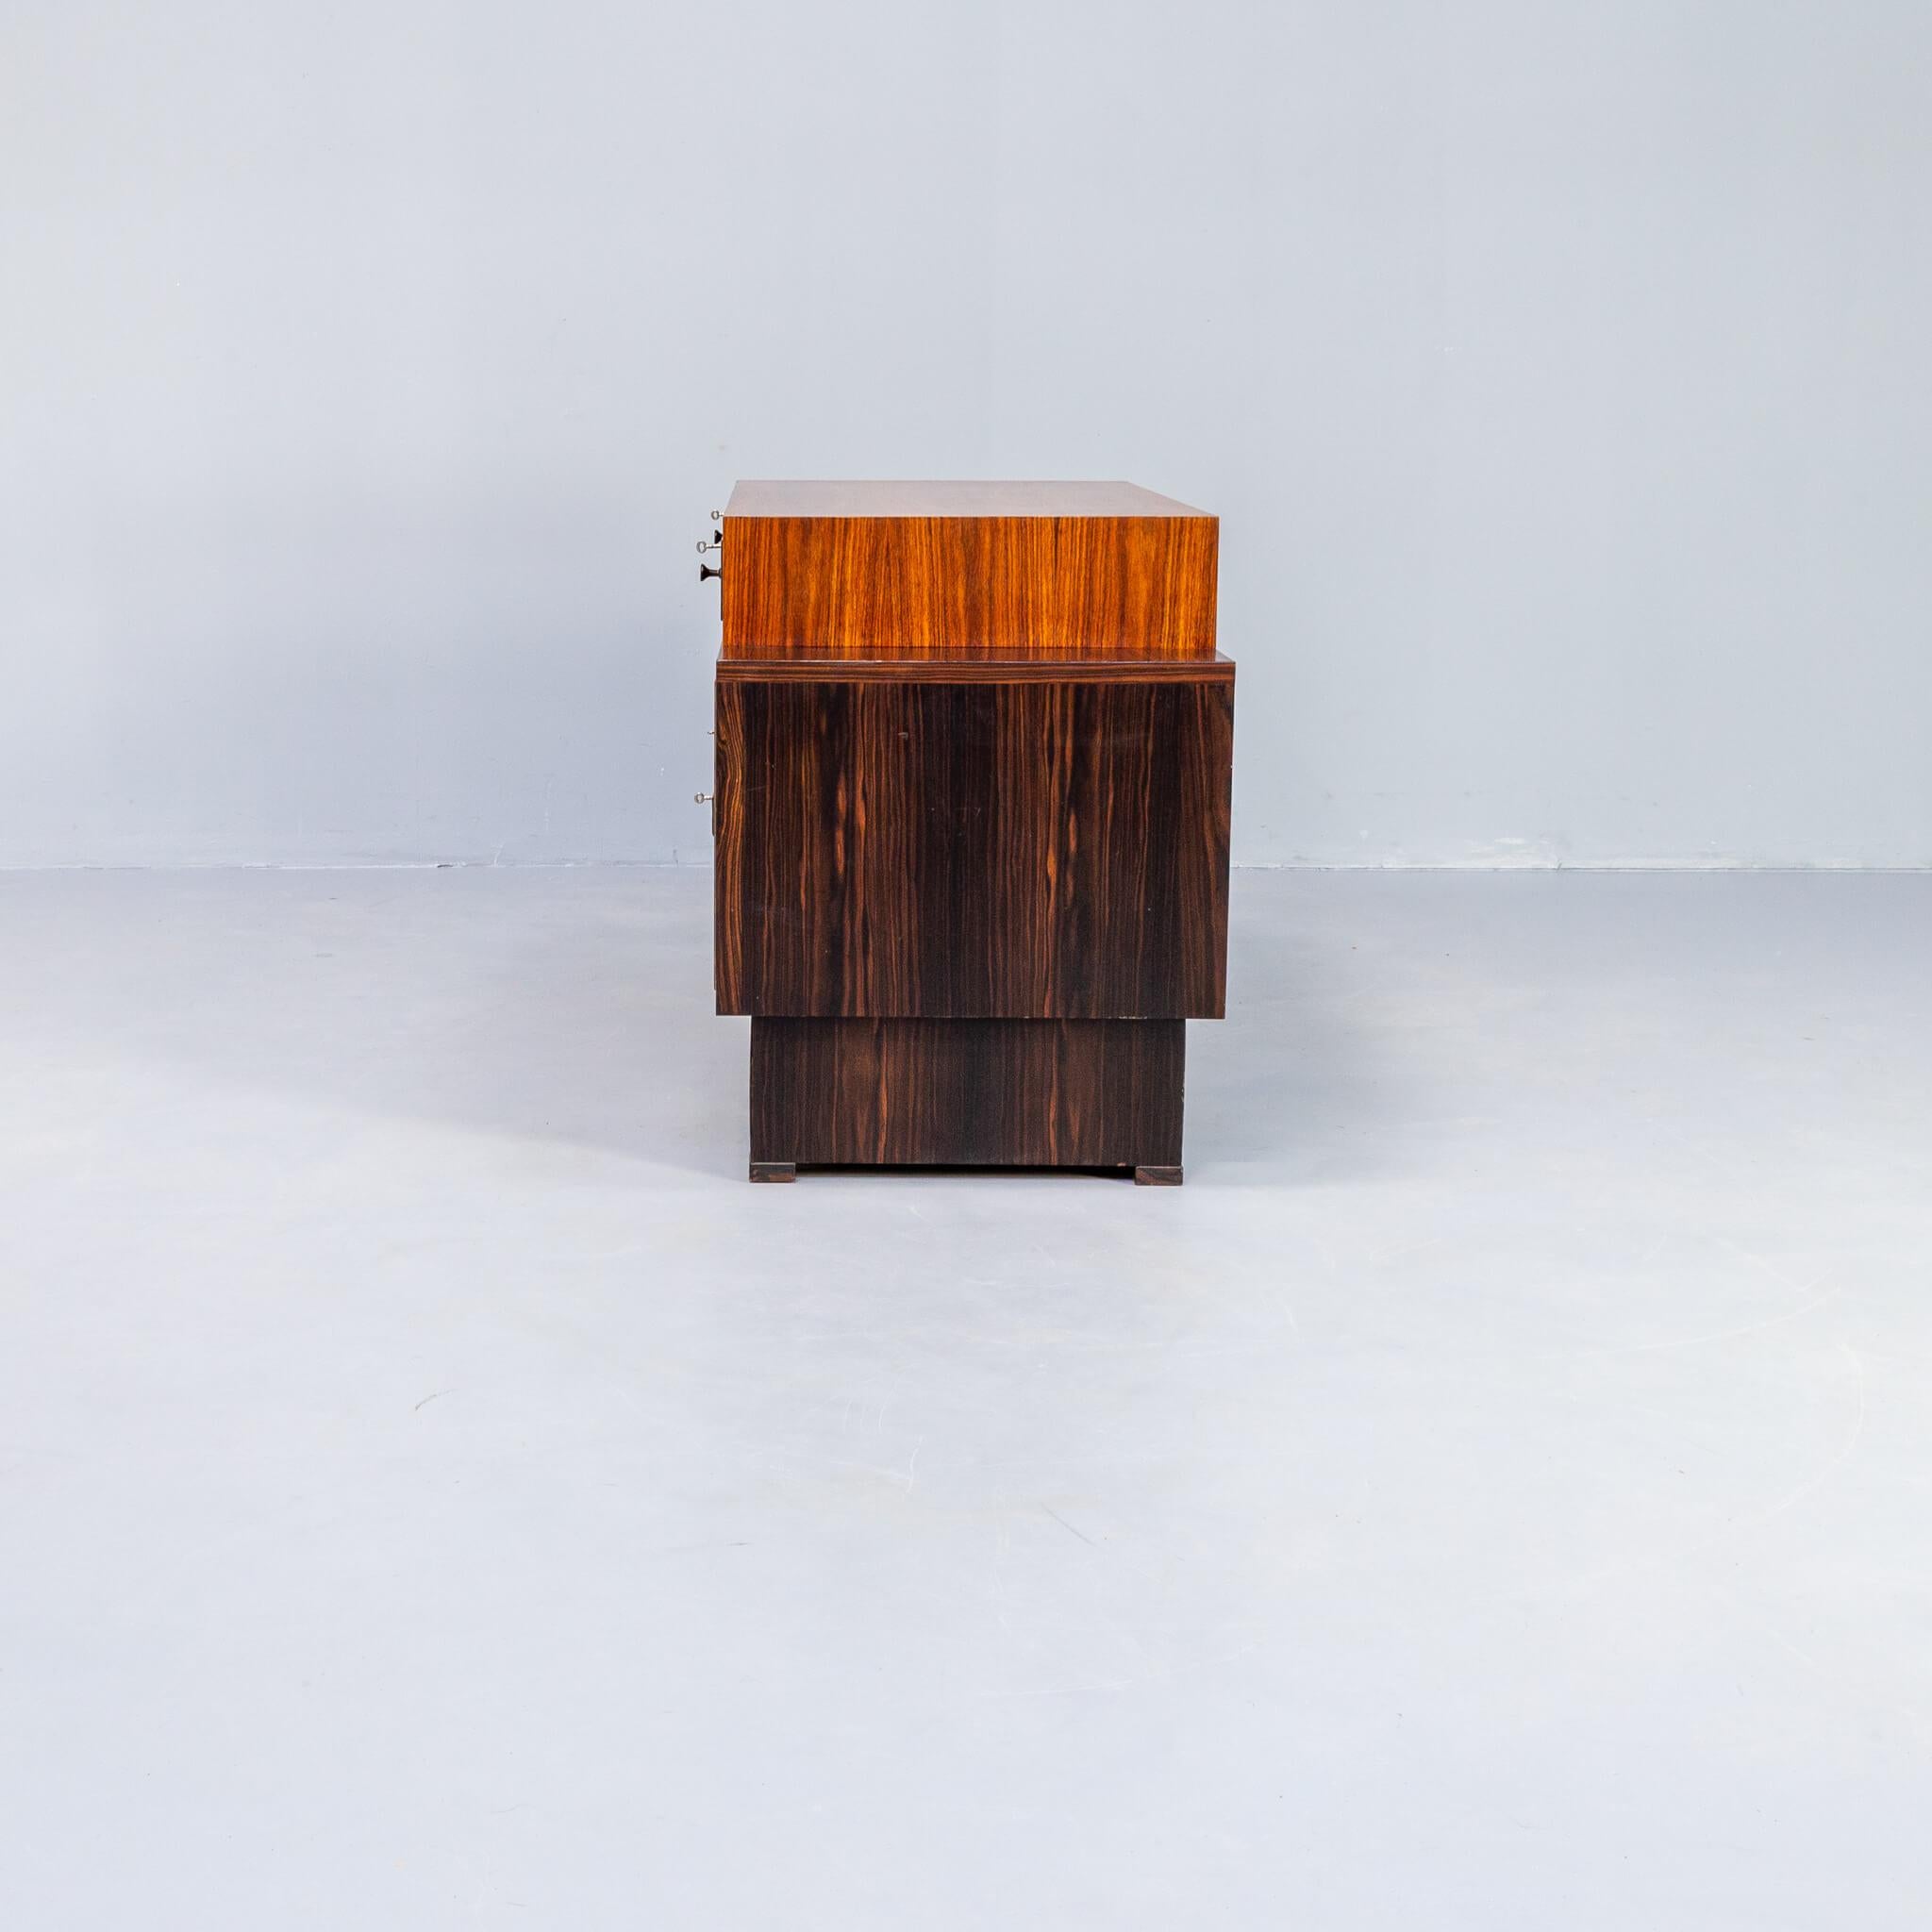 Teak Anton Hamaker Art Deco Writing Desk from the Amsterdam School for ‘t Woonhuys For Sale